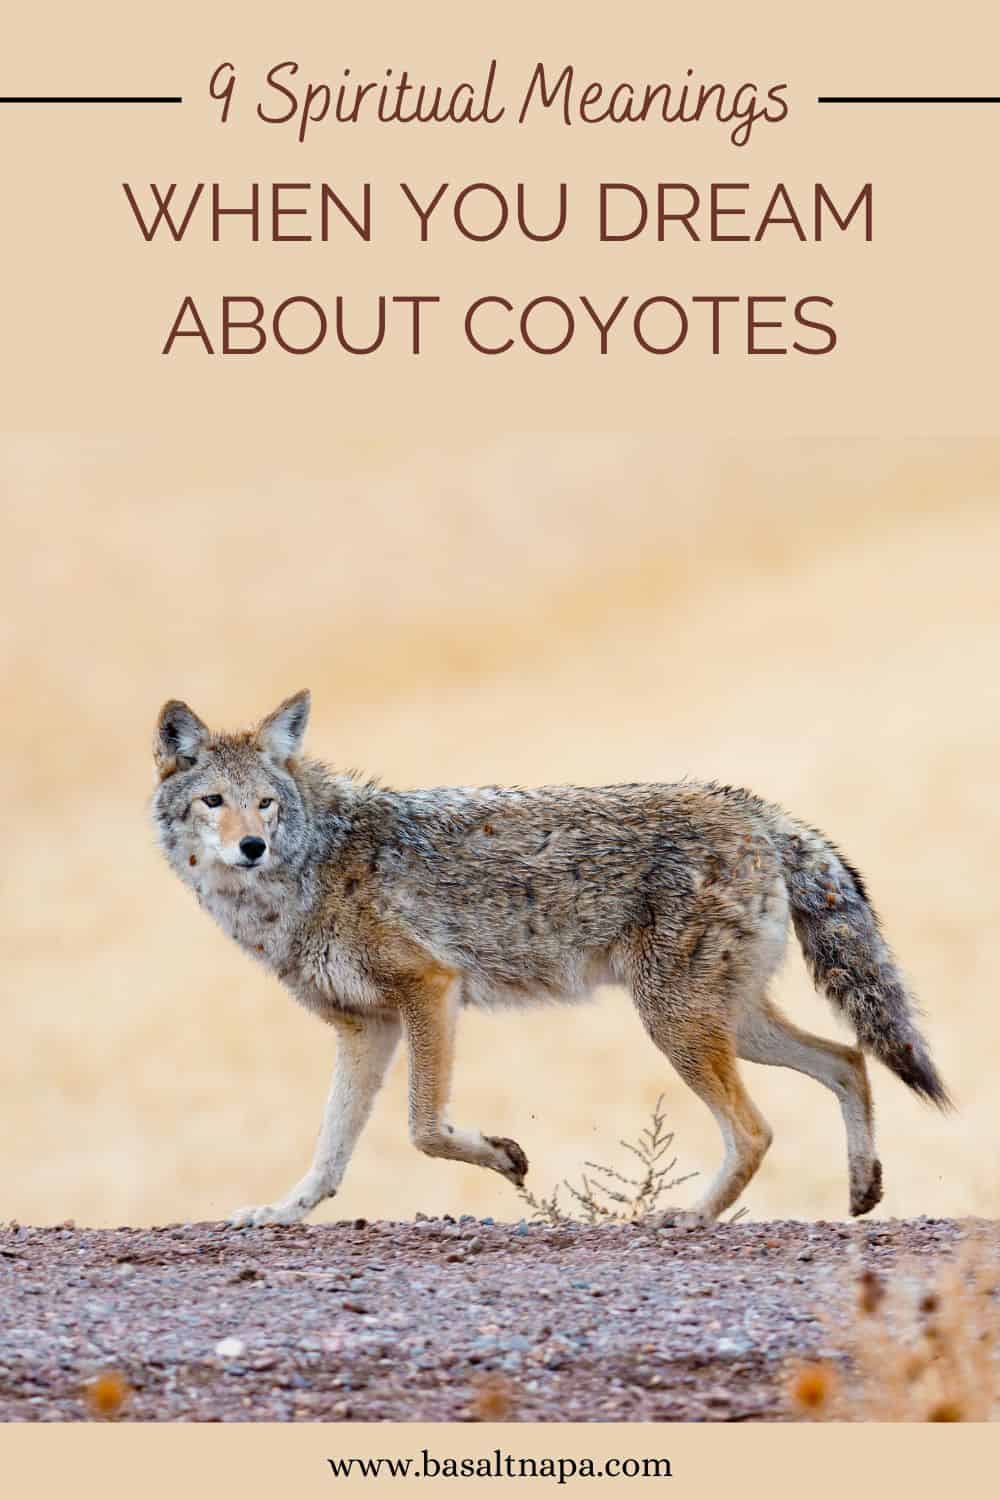 9 Spiritual Meanings When You Dream About Coyotes